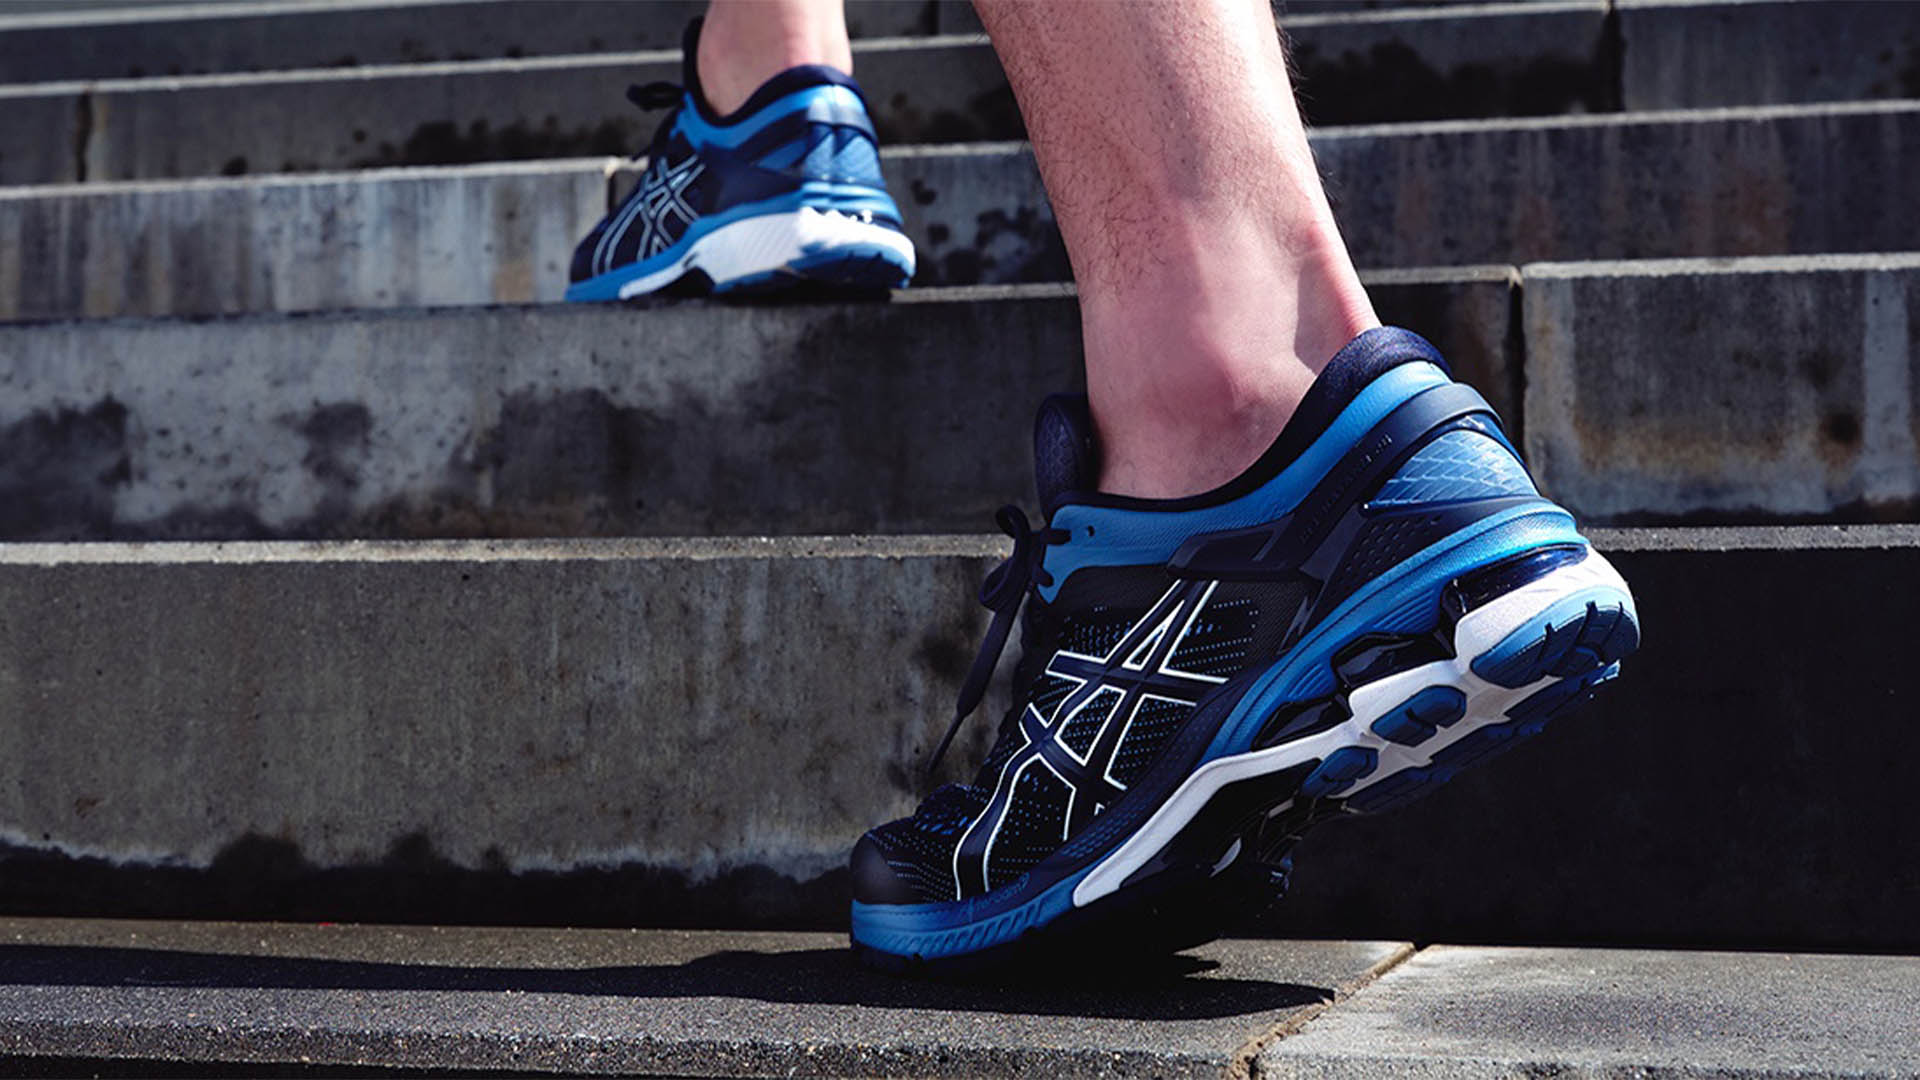 Petition club Try out Asics reveals net sales exceeded £2.5 billion, strong gross profit -  TheIndustry.fashion